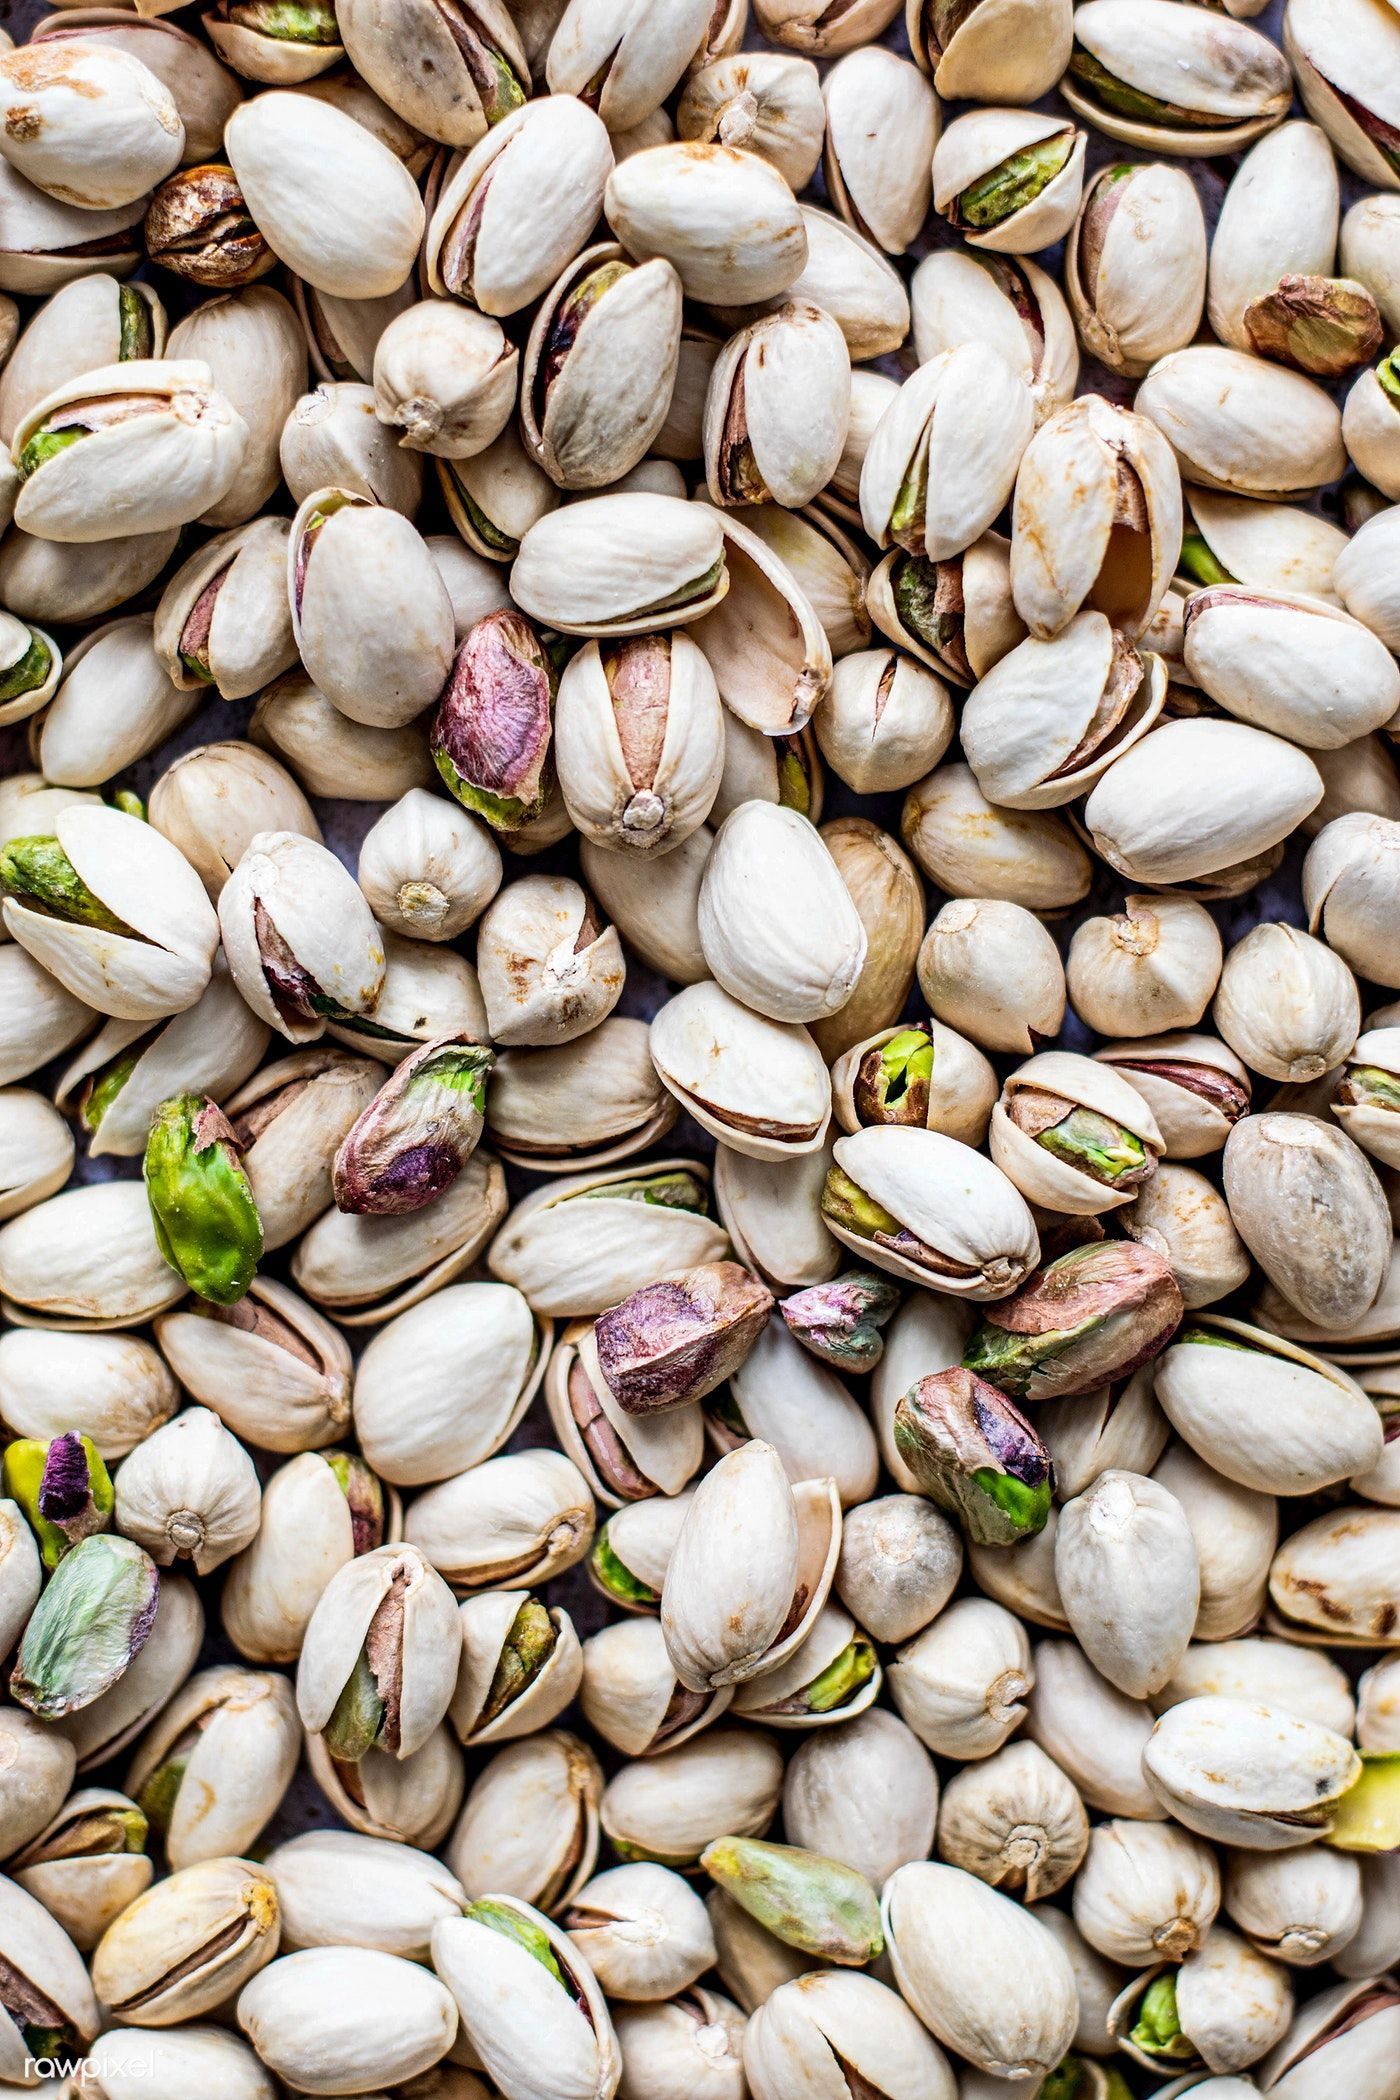 Download premium image of Fresh salted crunchy pistachio nuts 2037893. Pistachios nuts, Food texture, Aesthetic food